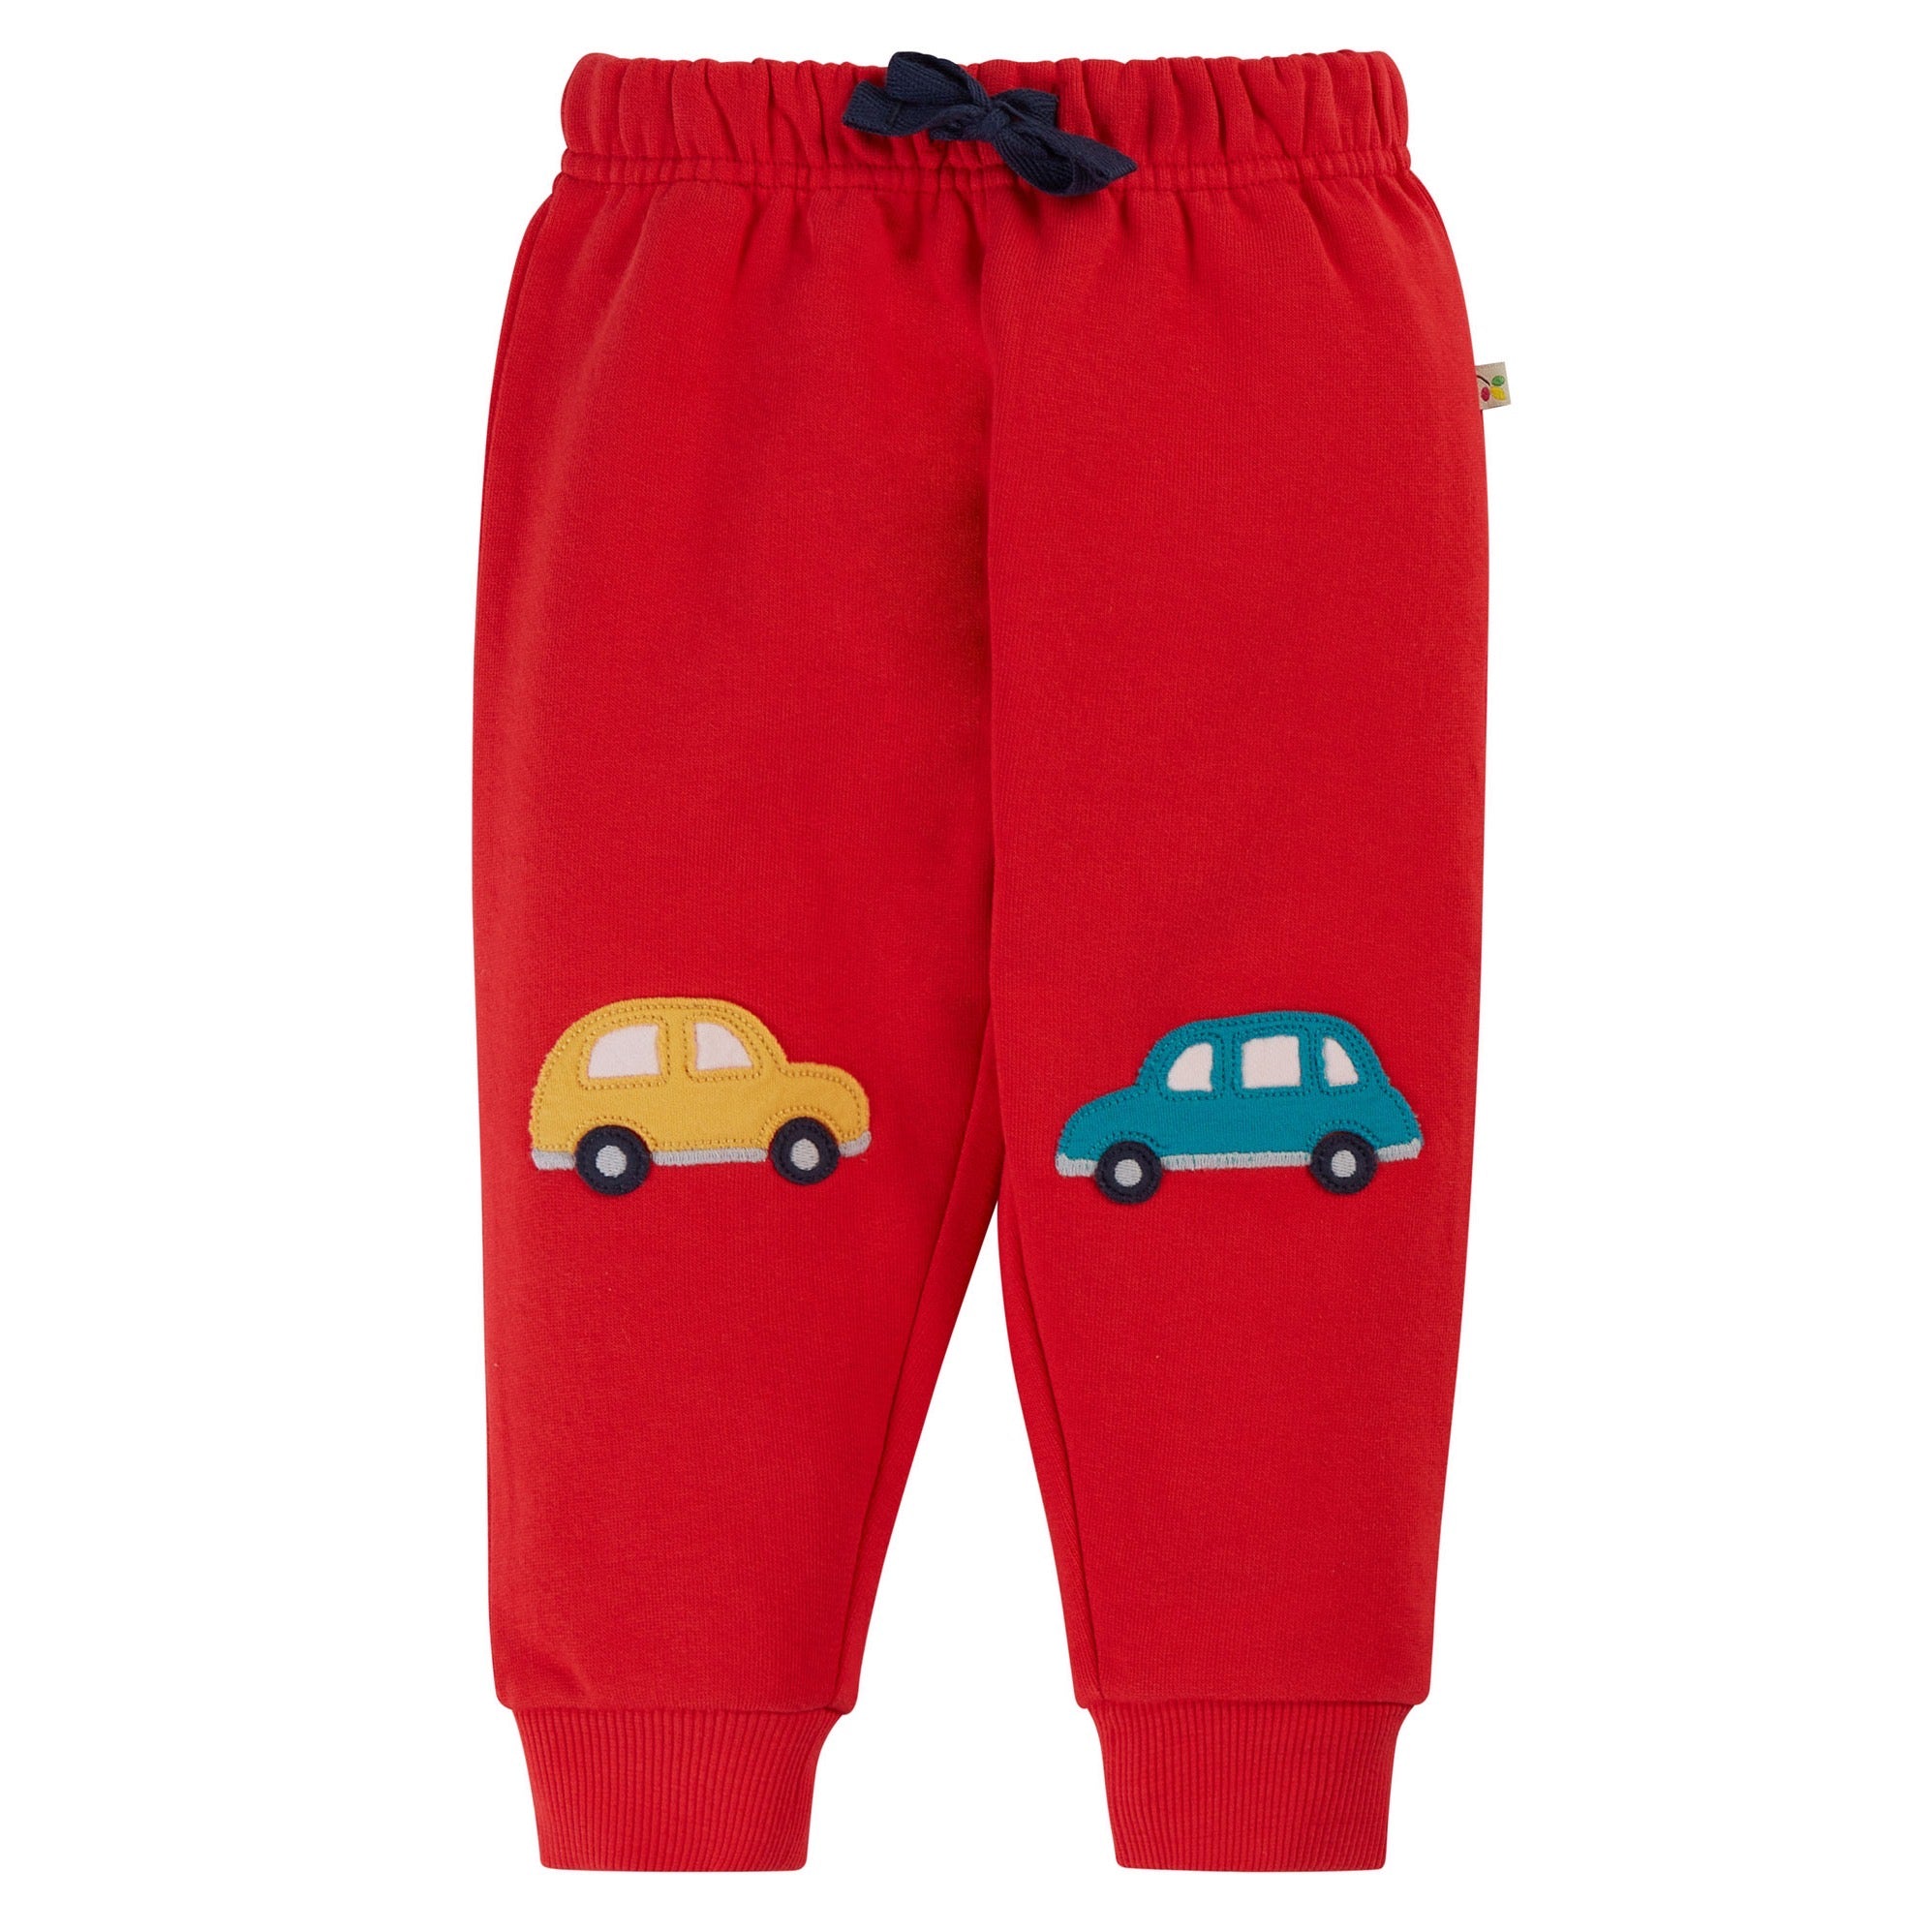 Frugi Character Crawlers Pus308tcz Cars Clothing 0-3M / Red,3-6M / Red,6-12M / Red,12-18M / Red,18-24M / Red,2-3YRS / Red,3-4YRS / Red,4-5YRS / Red